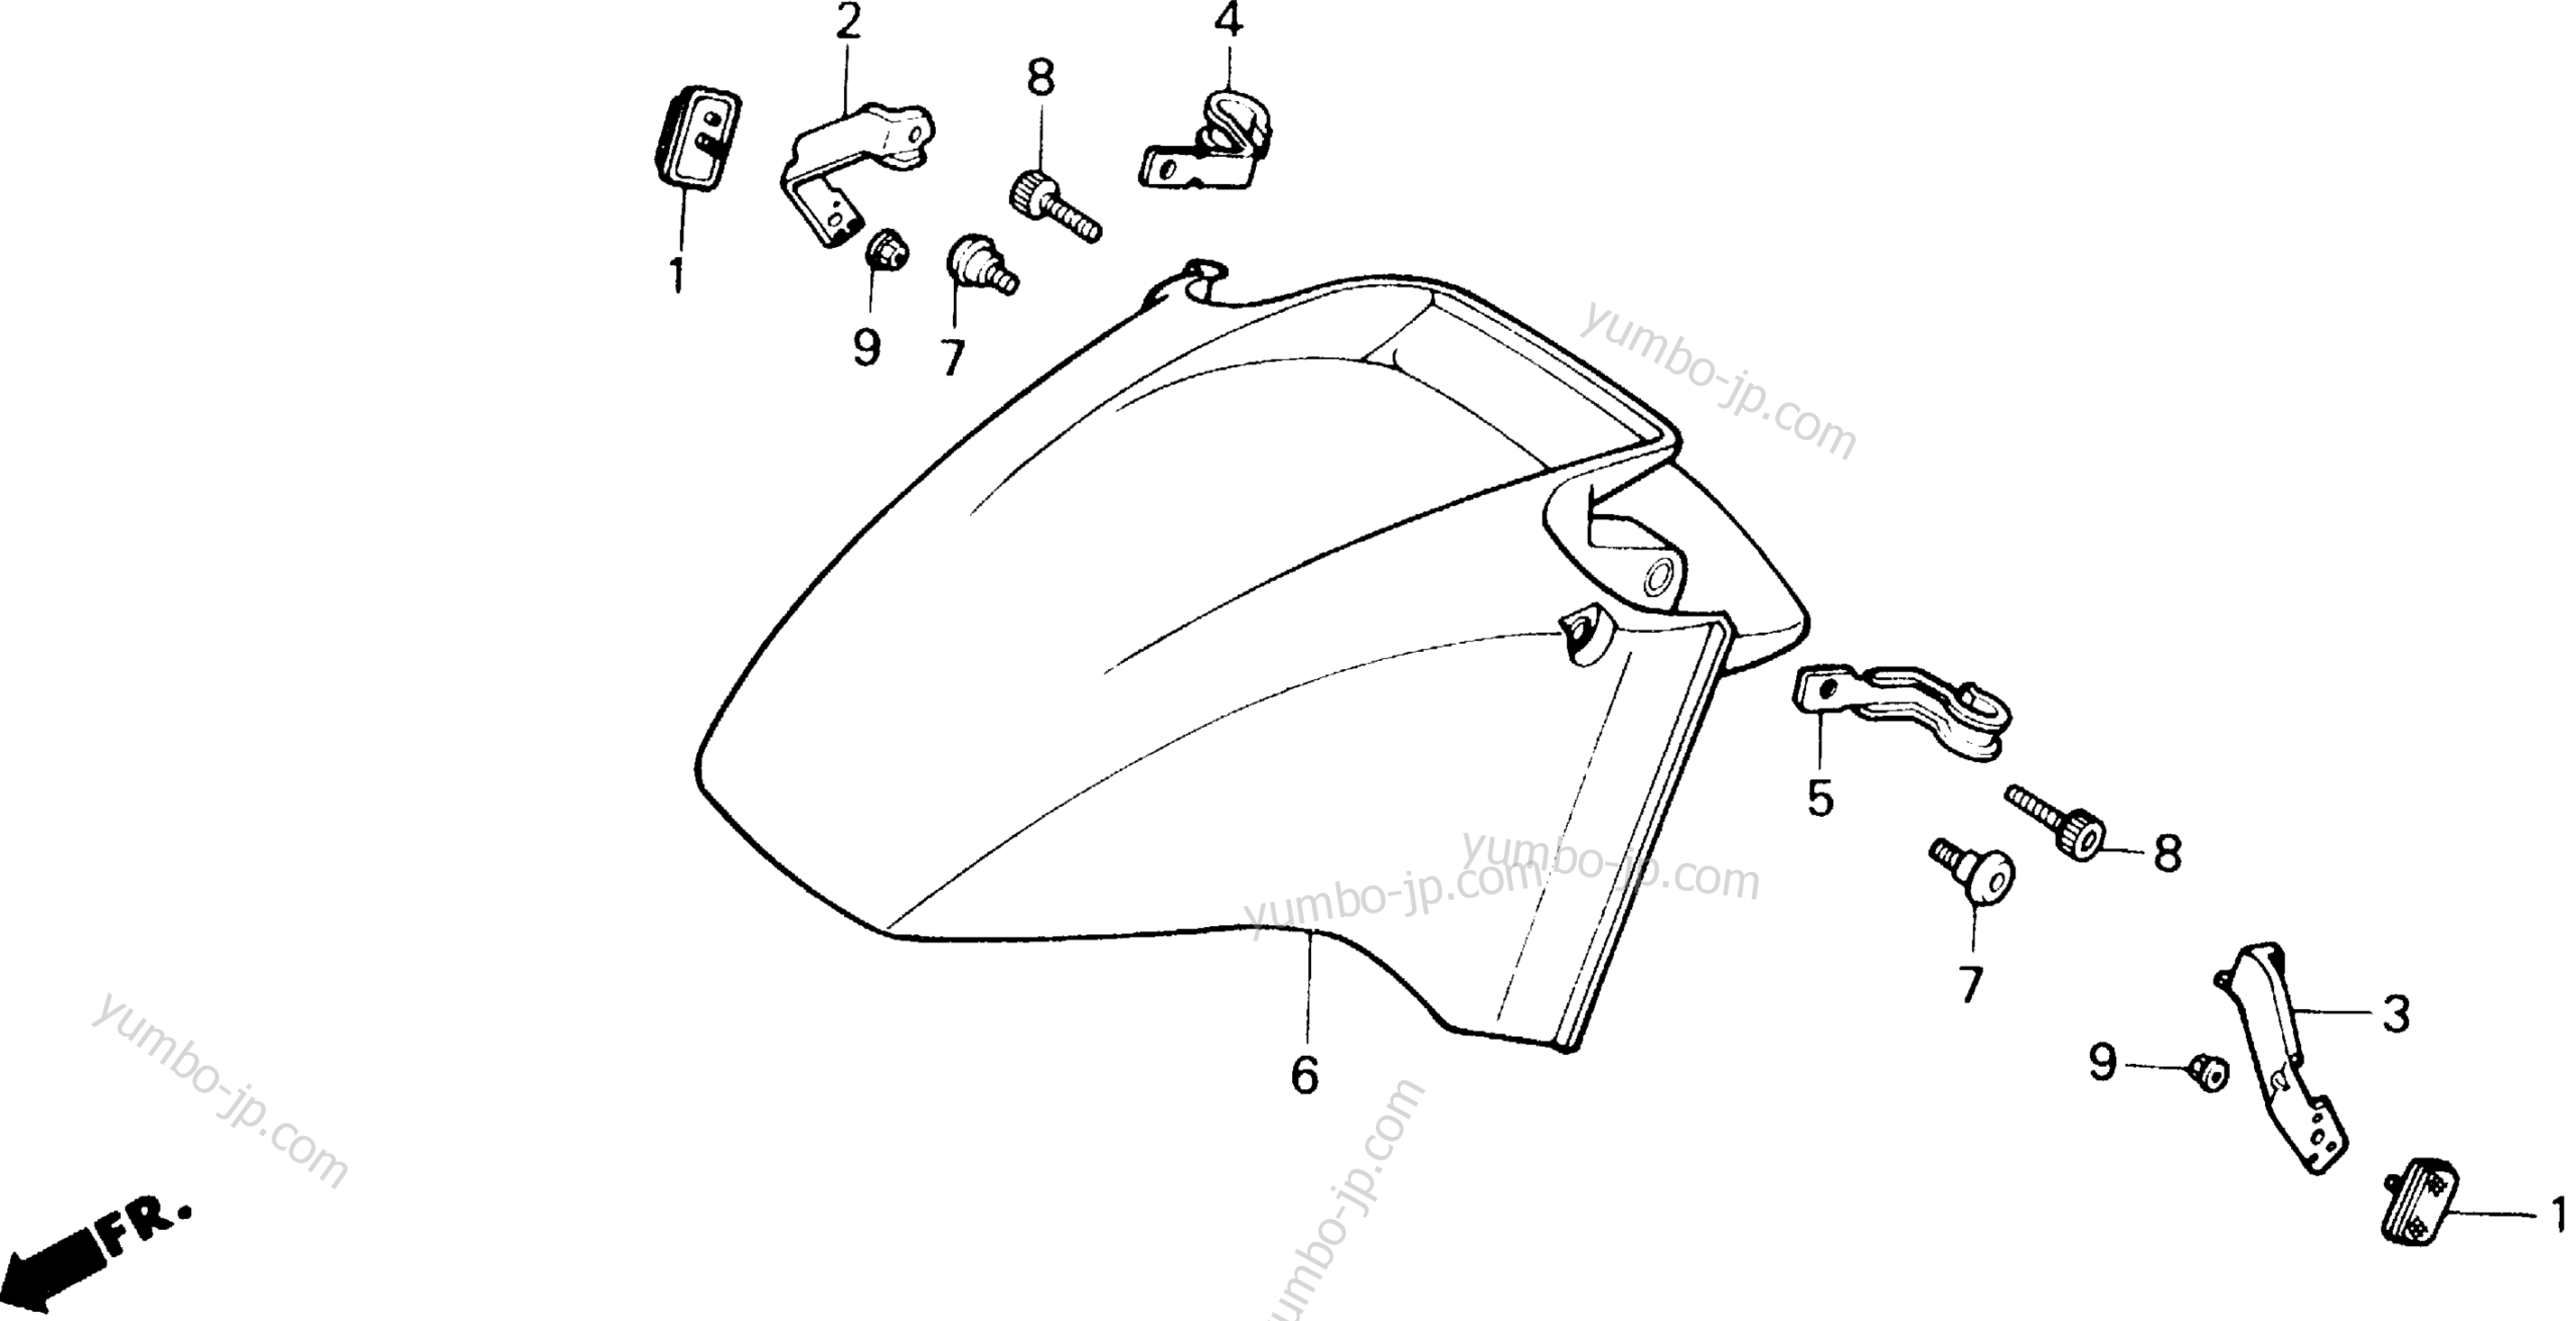 FRONT FENDER for motorcycles HONDA VFR700F2 AC 1986 year